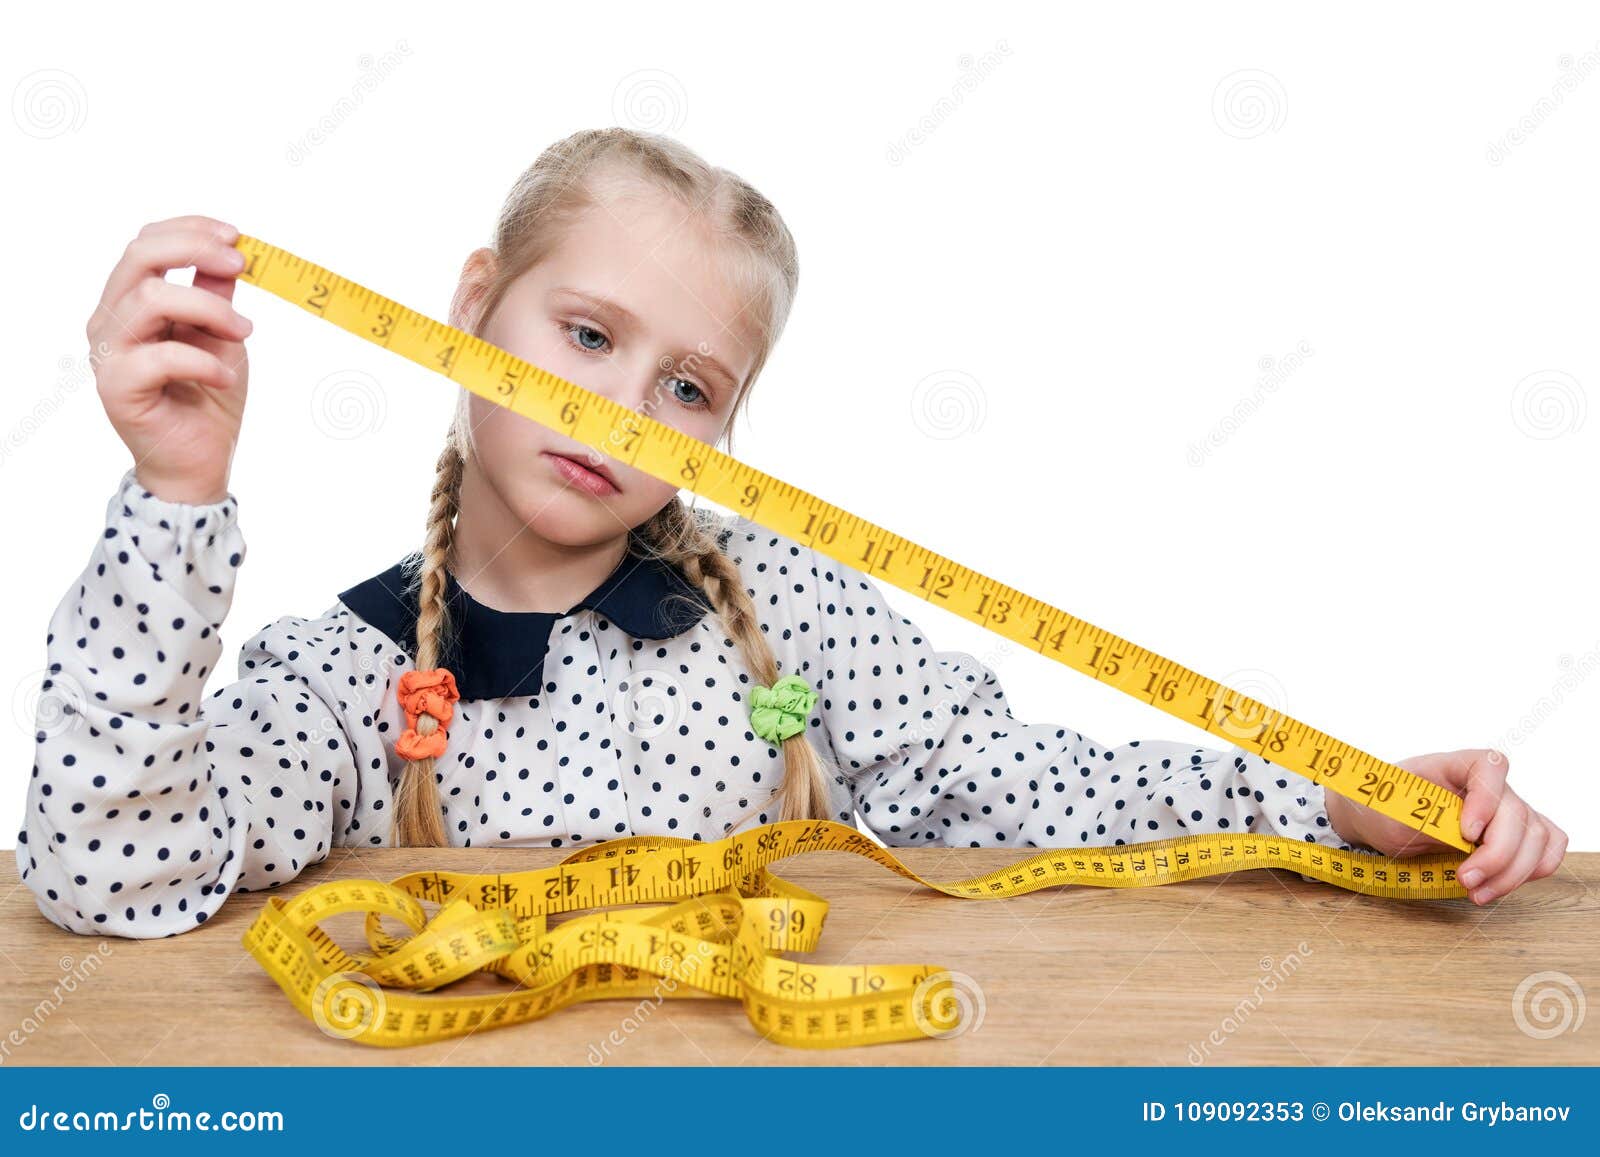 https://thumbs.dreamstime.com/z/little-girl-sitting-wooden-table-studying-measuring-tape-measure-isolated-white-background-child-studying-measuring-109092353.jpg